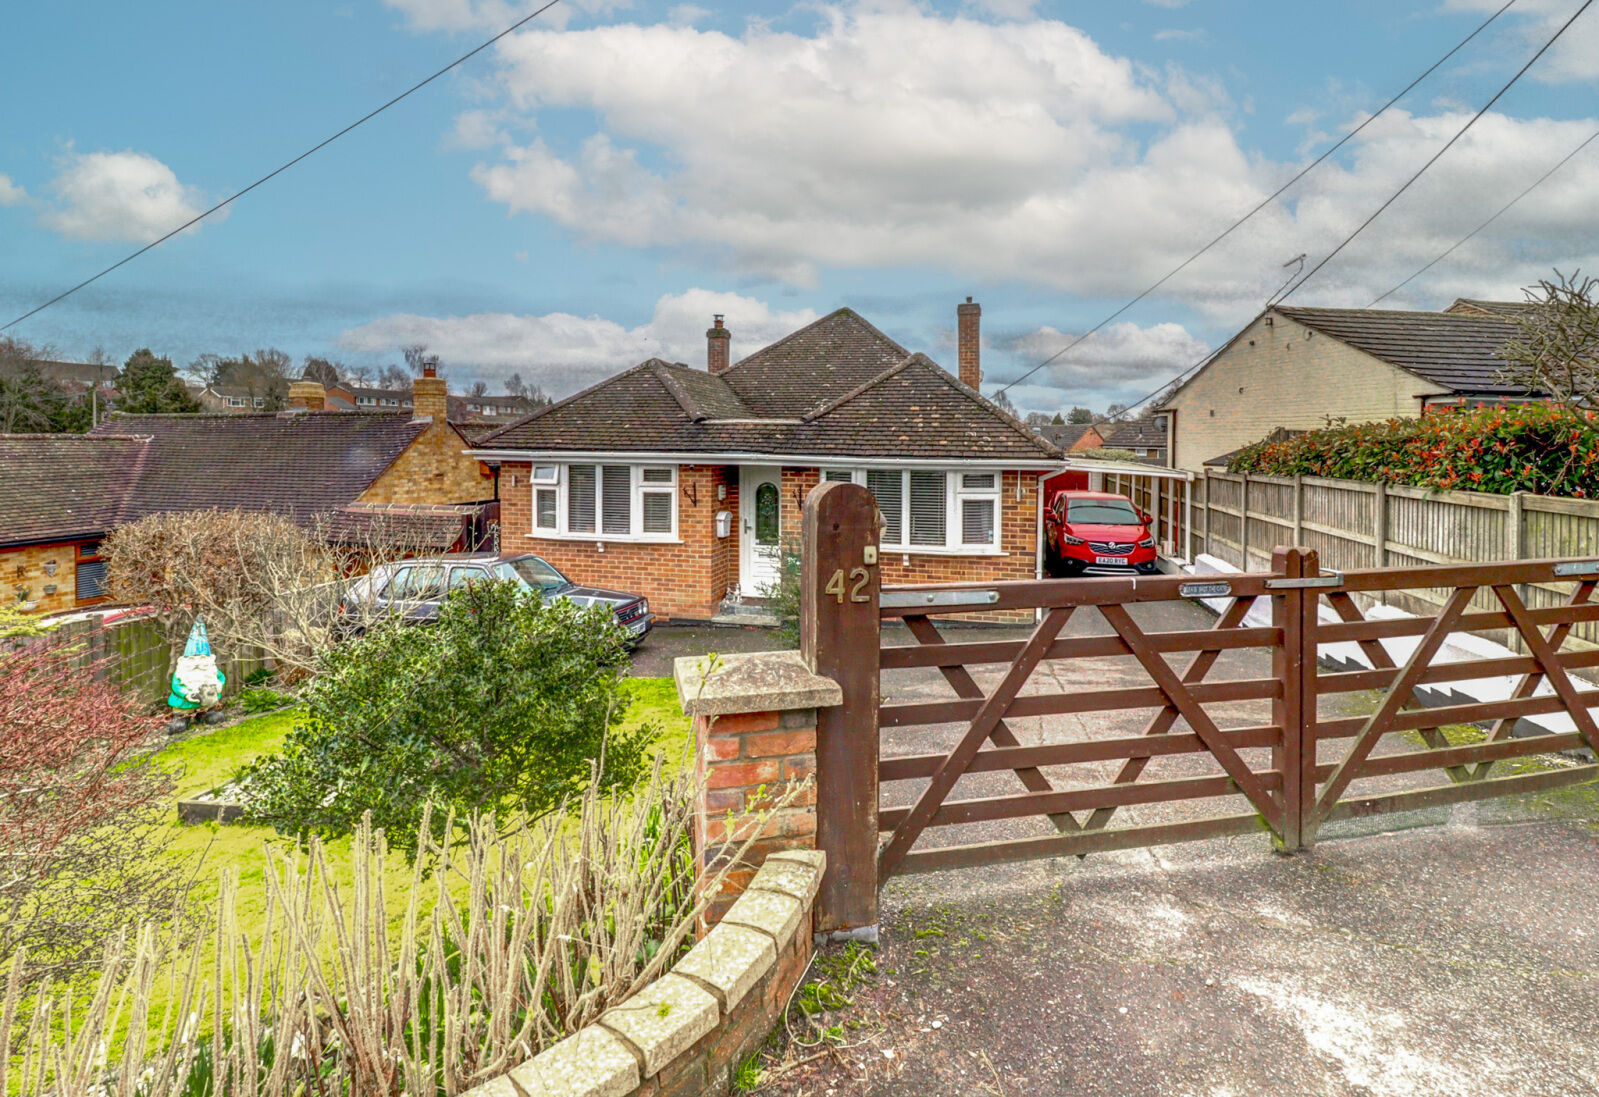 3 bedroom detached bungalow for sale Windmill Lane, Widmer End, HP15, main image